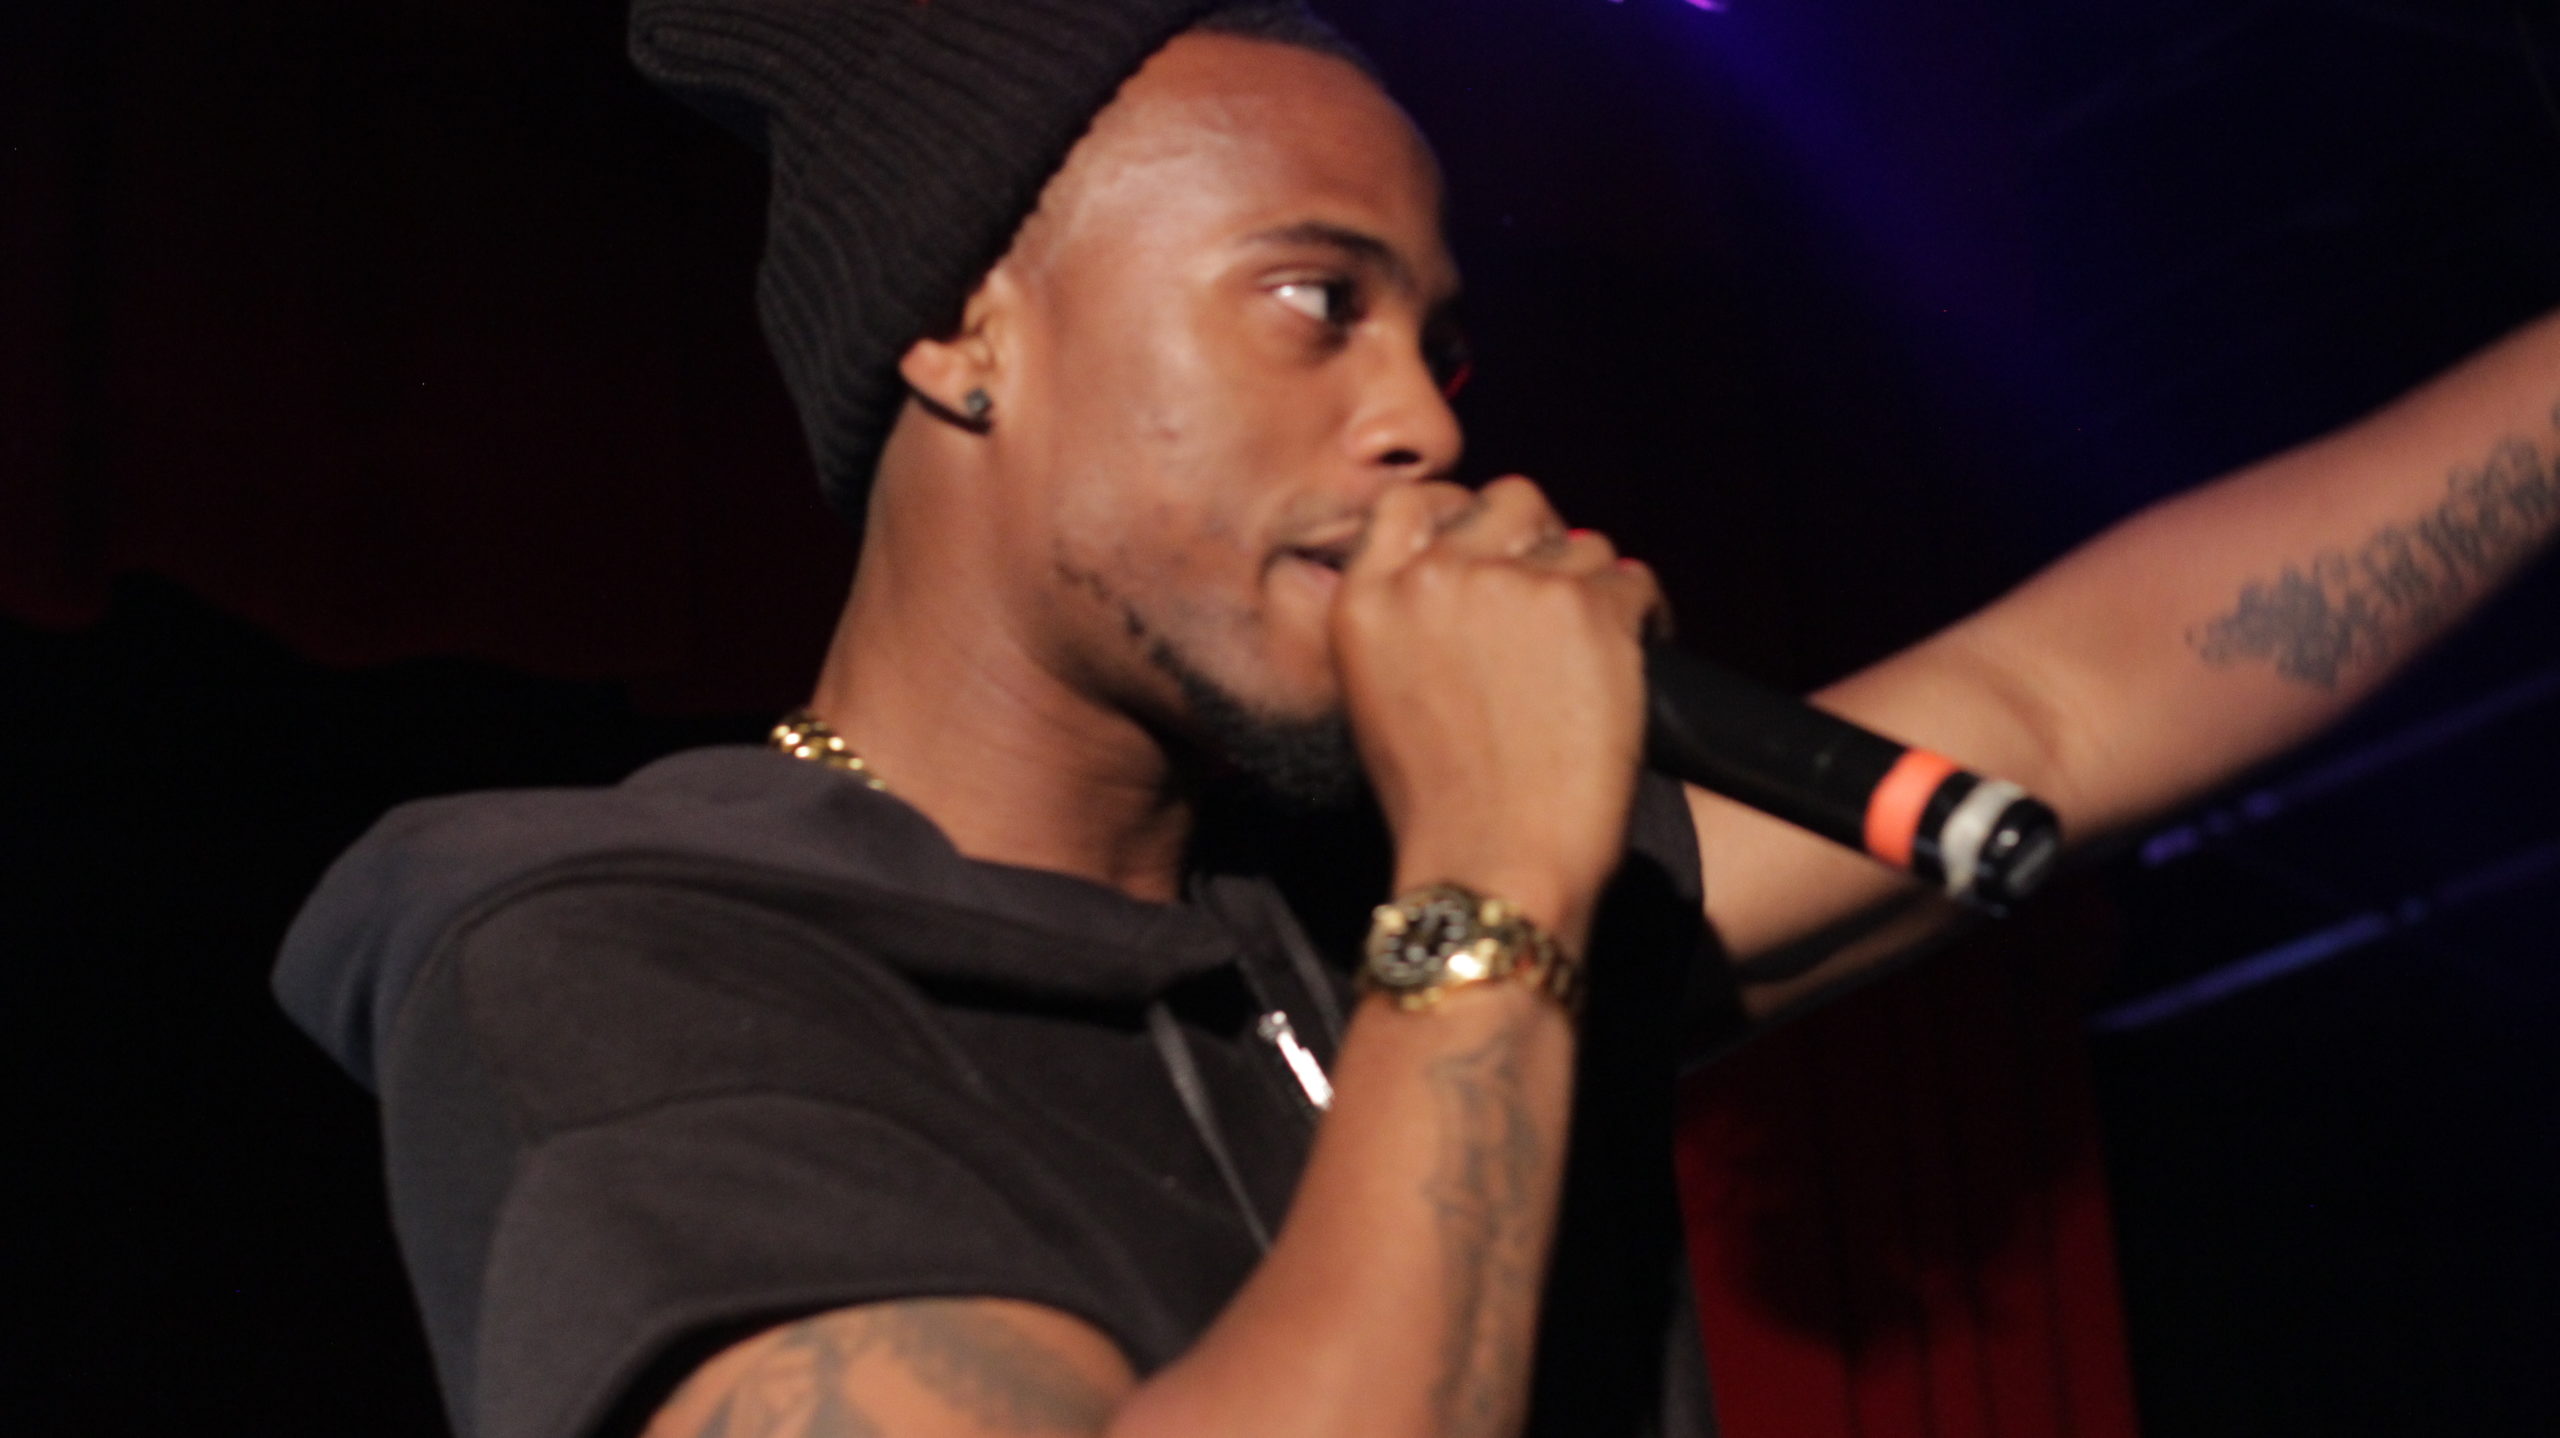 B.o.B Performs “We Still In This” During A3C Festival (Video)